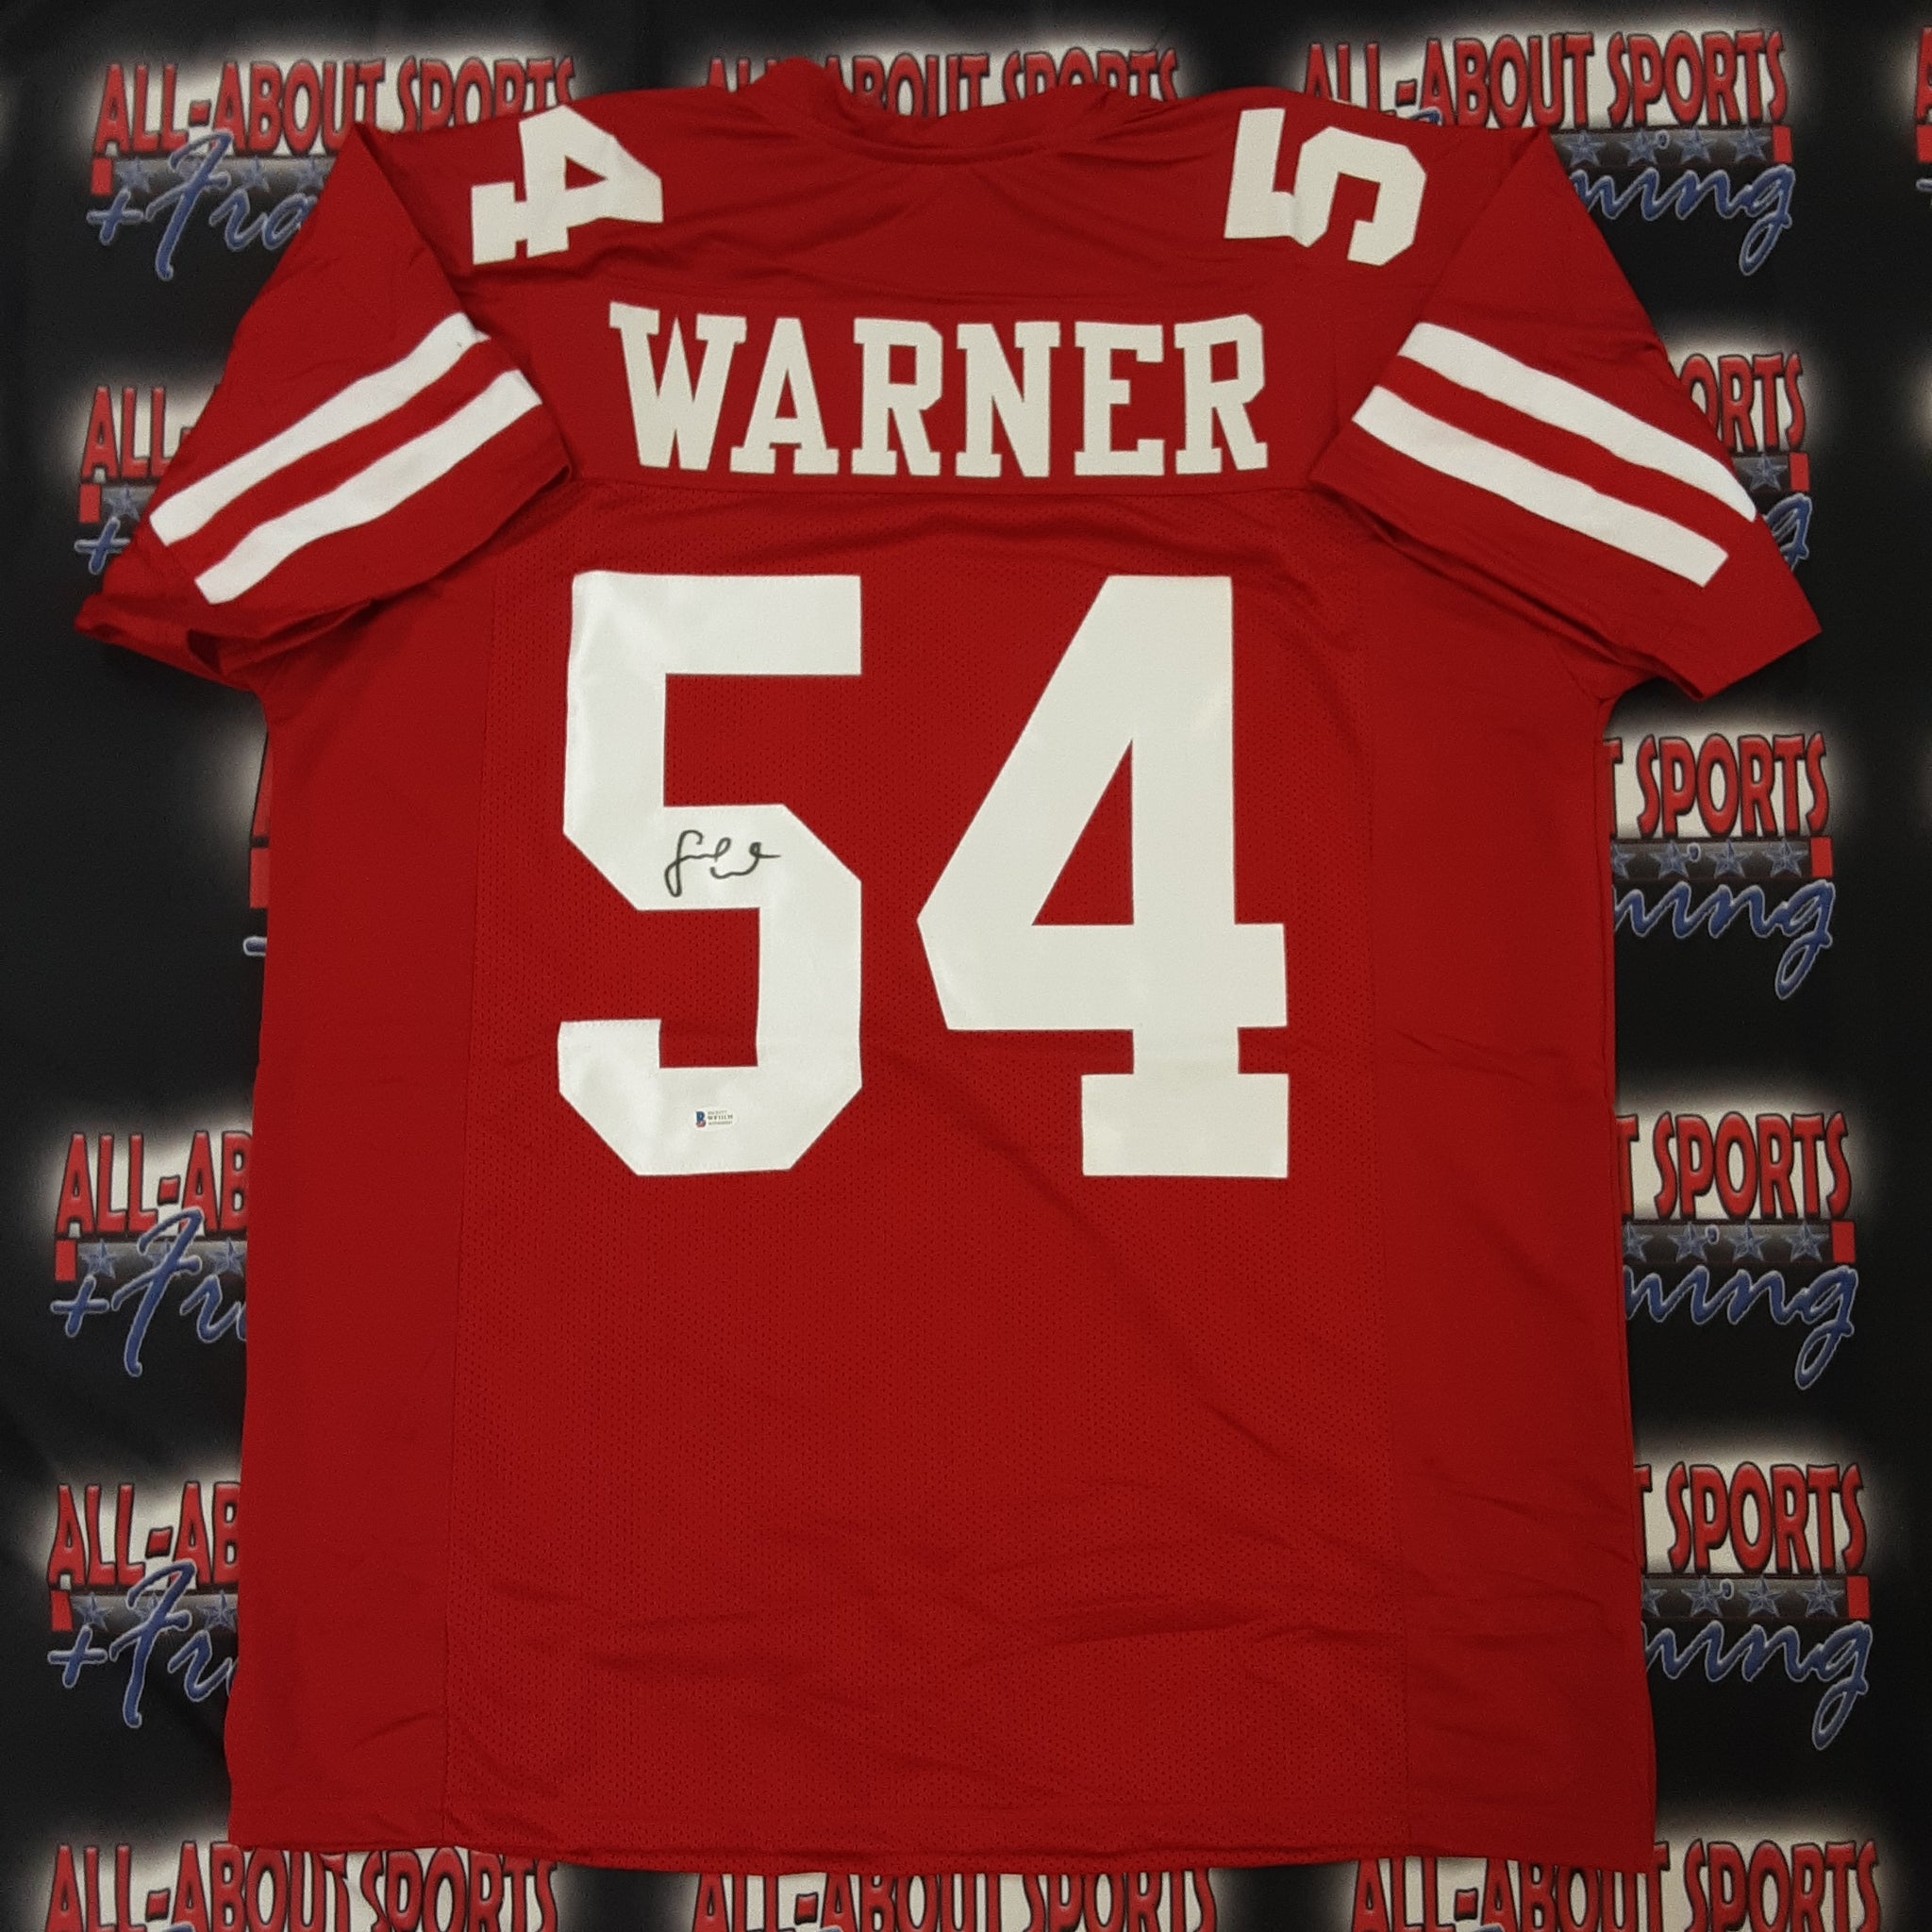 49ers jersey authentic